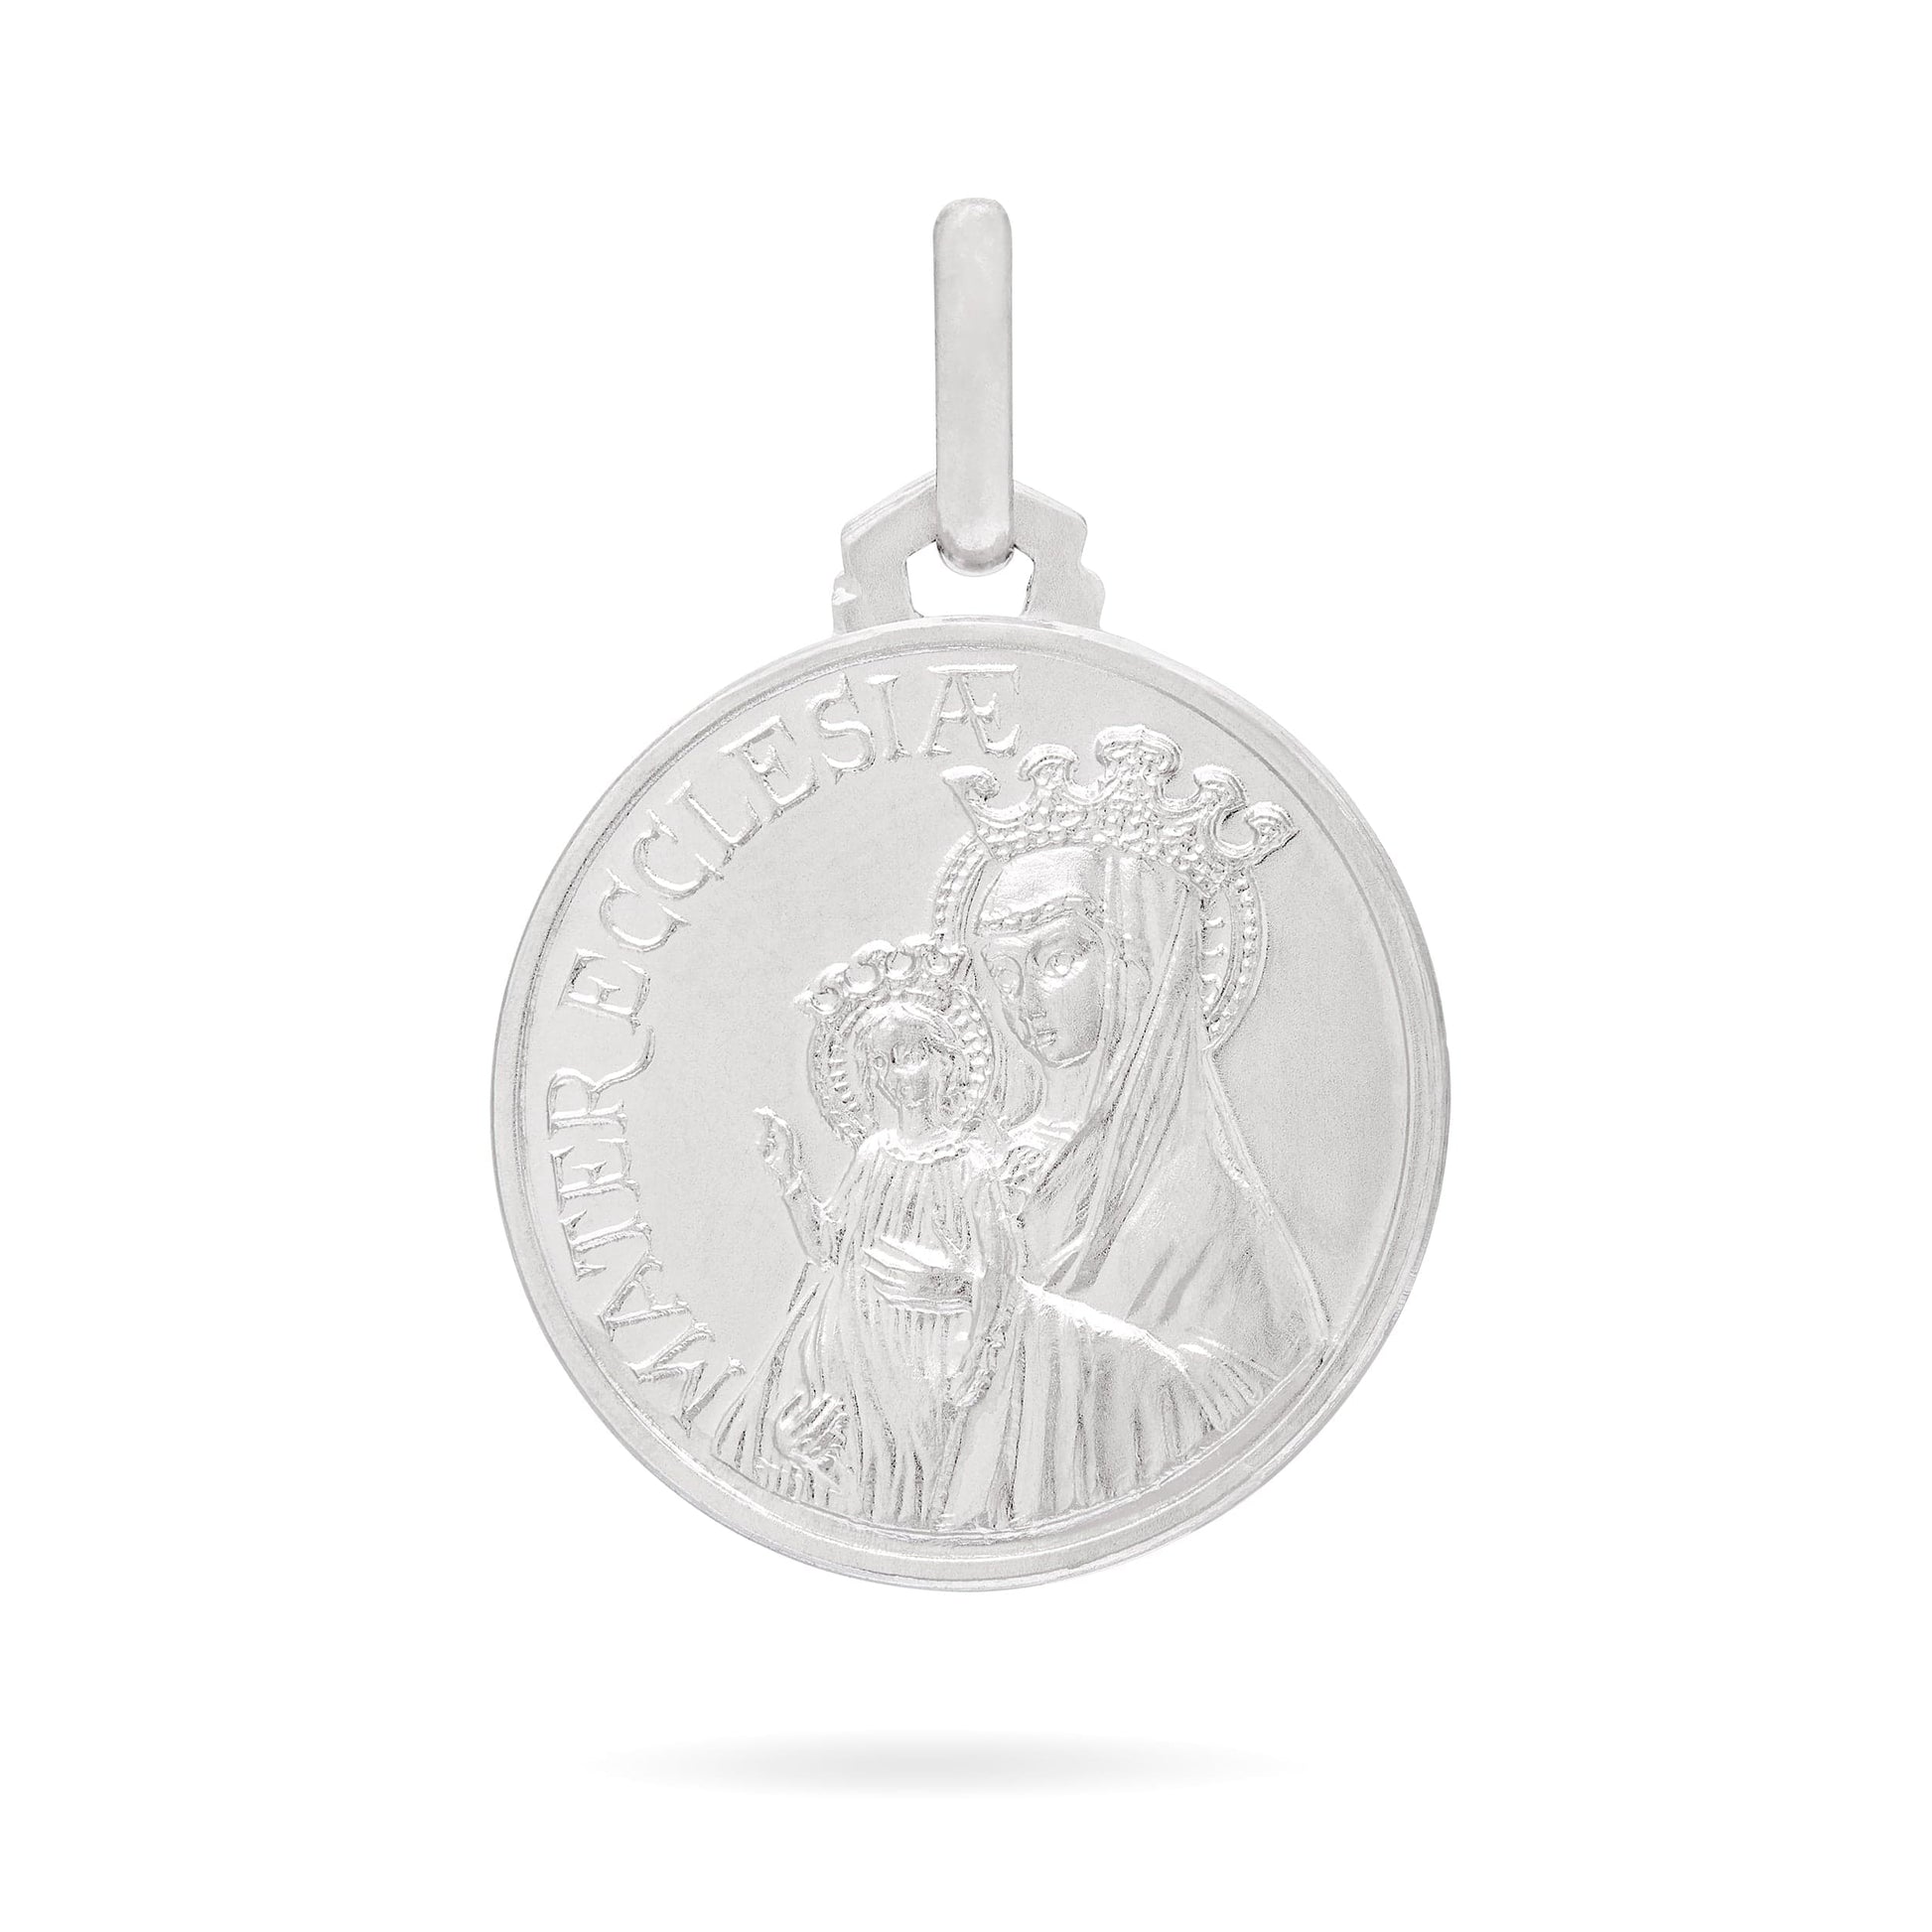 MONDO CATTOLICO Jewelry 18 mm (0.70 in) White Gold Medal Mater Ecclesiae